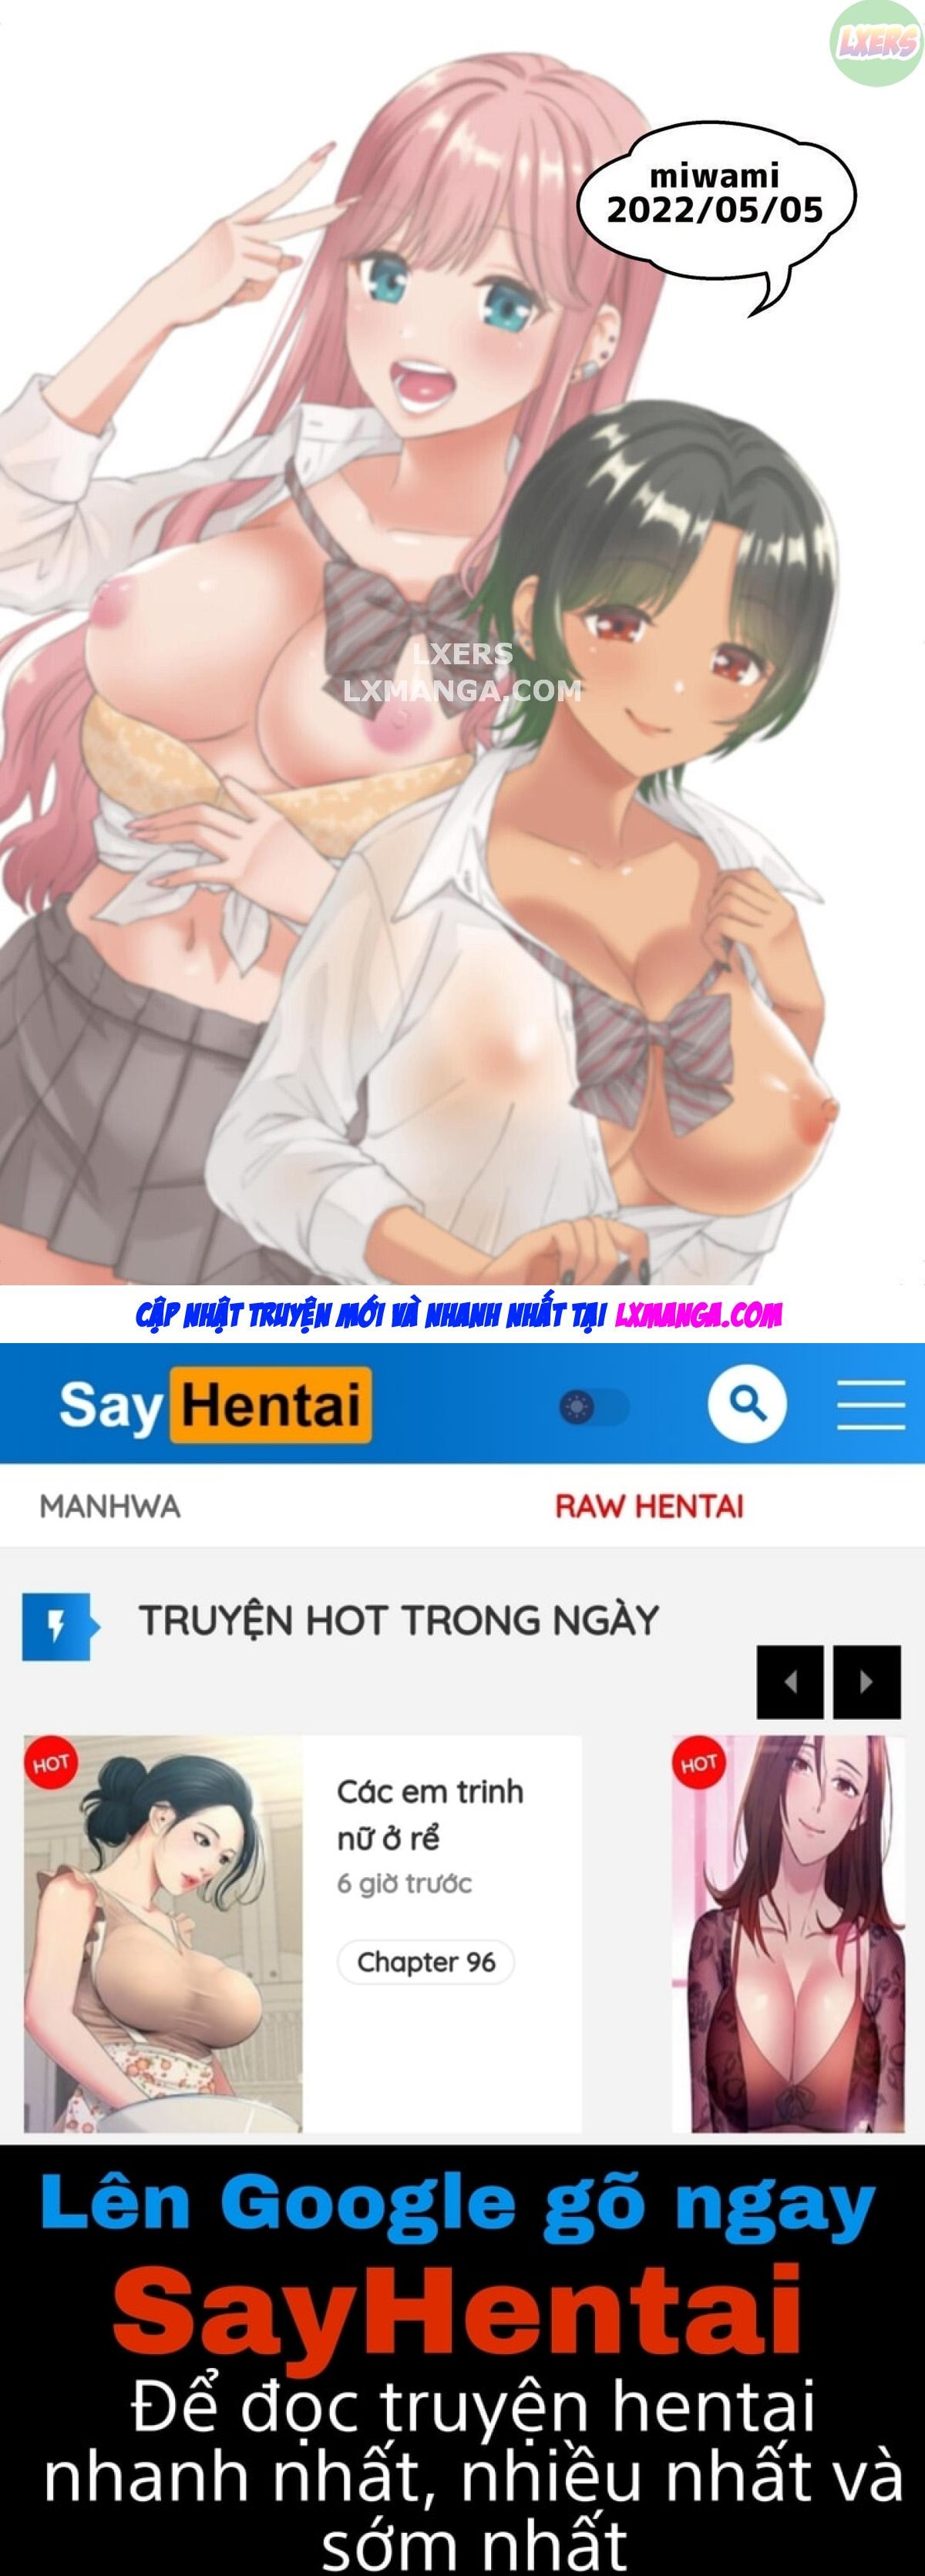 That Time Gyarus Asked Me to Grope their Tits After Class Chương Oneshot Trang 47